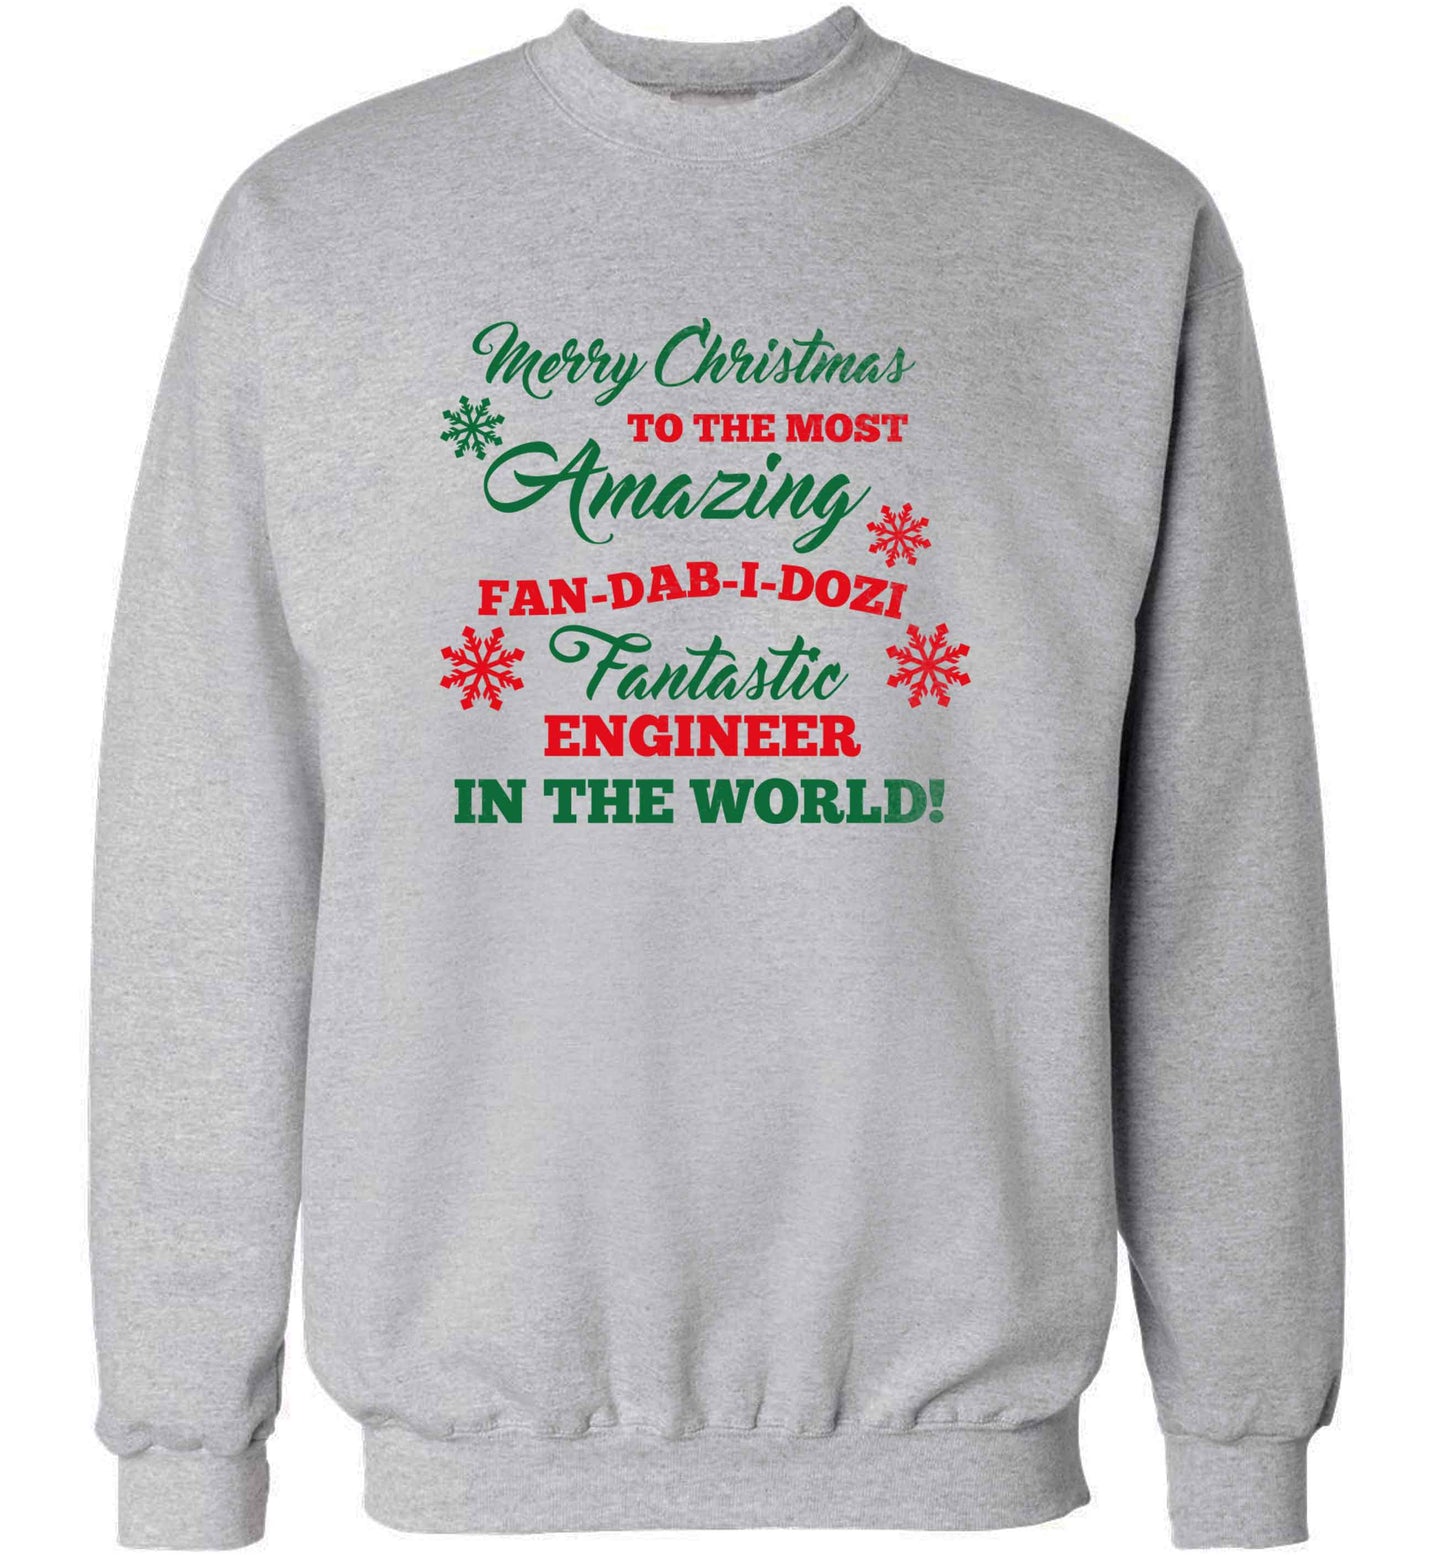 Merry Christmas to the most amazing engineer in the world! adult's unisex grey sweater 2XL